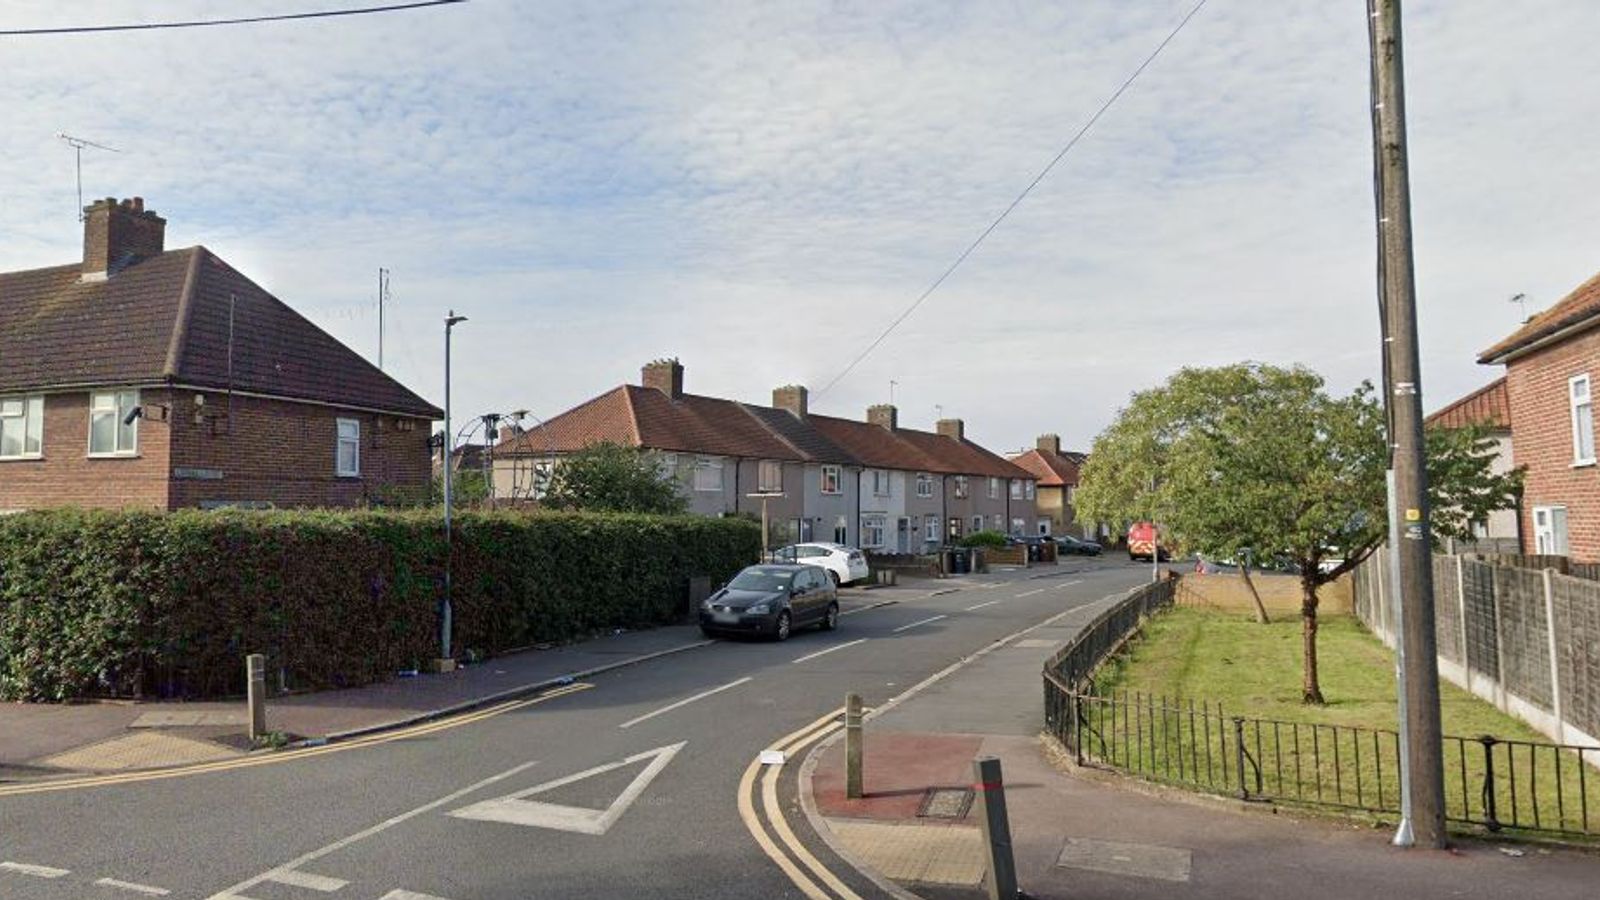 Bodies of two young boys found at property in Dagenham